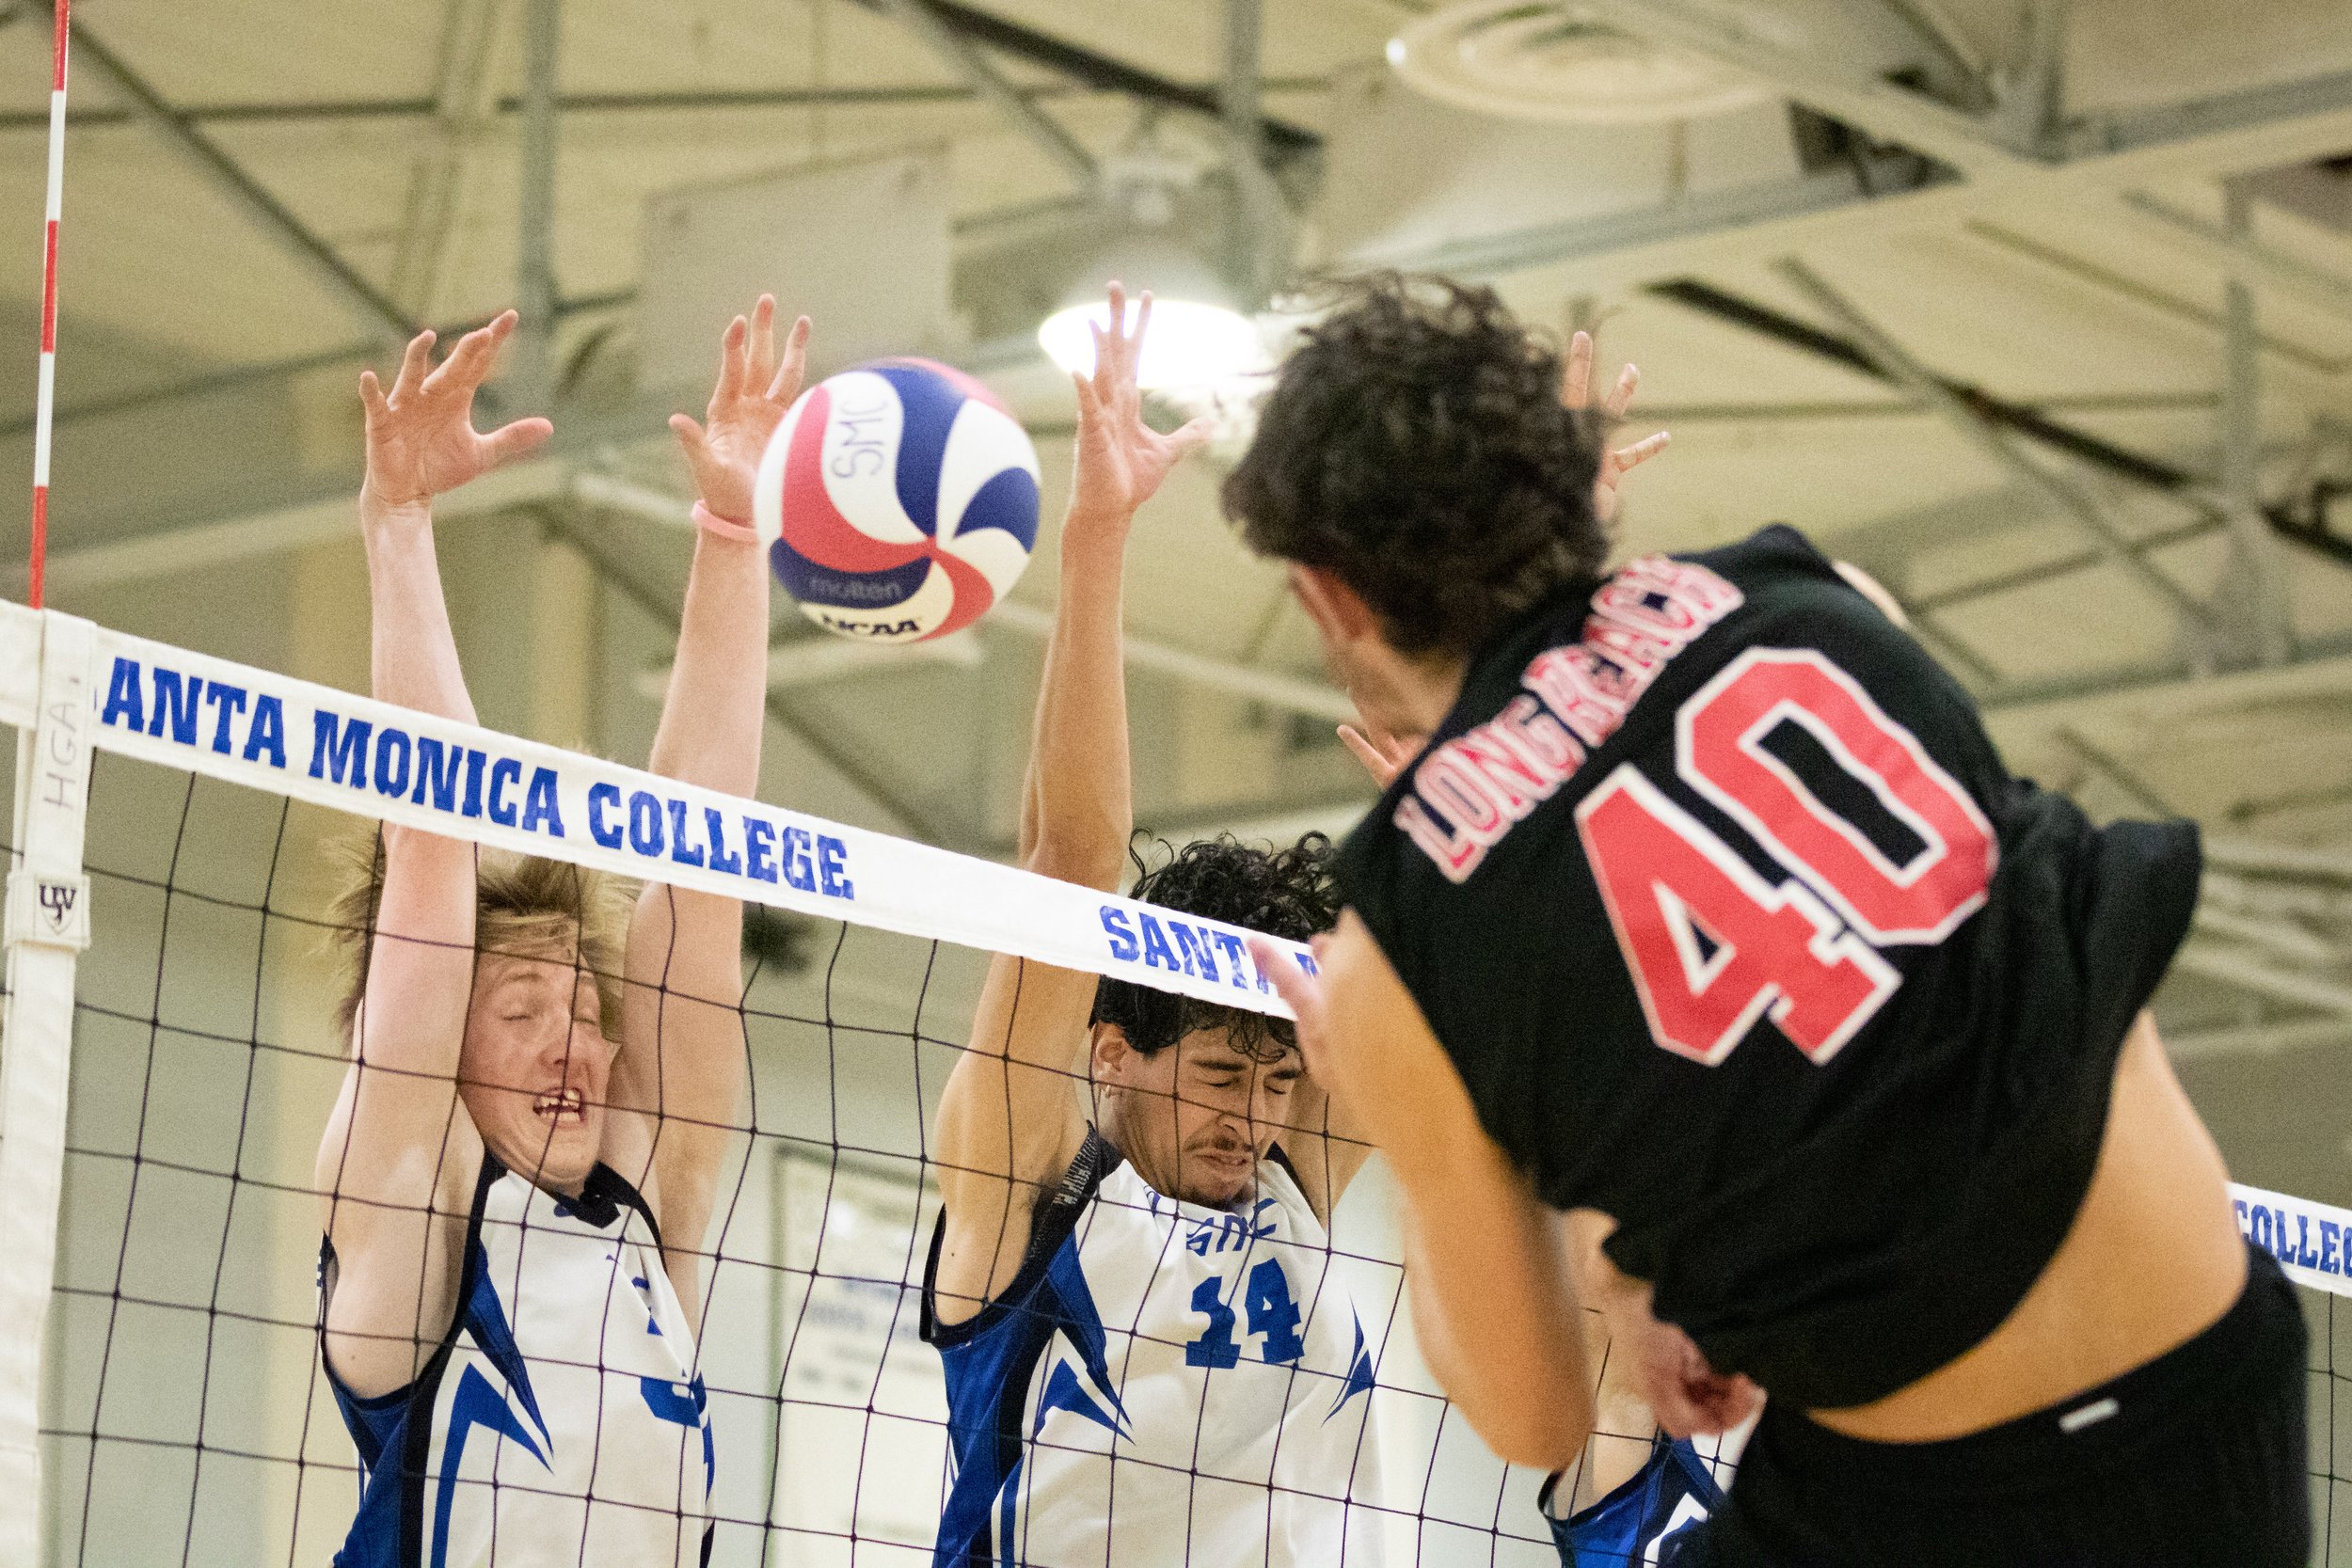  Santa Monica College Corsair setter Camden Higbee (3, left) and opposite Luis Garzon (14, center) attempting to block a spike by Long Beach City College Viking Matthew Pennala (40, right) during the first set of a home game in Santa Monica, Calif., 